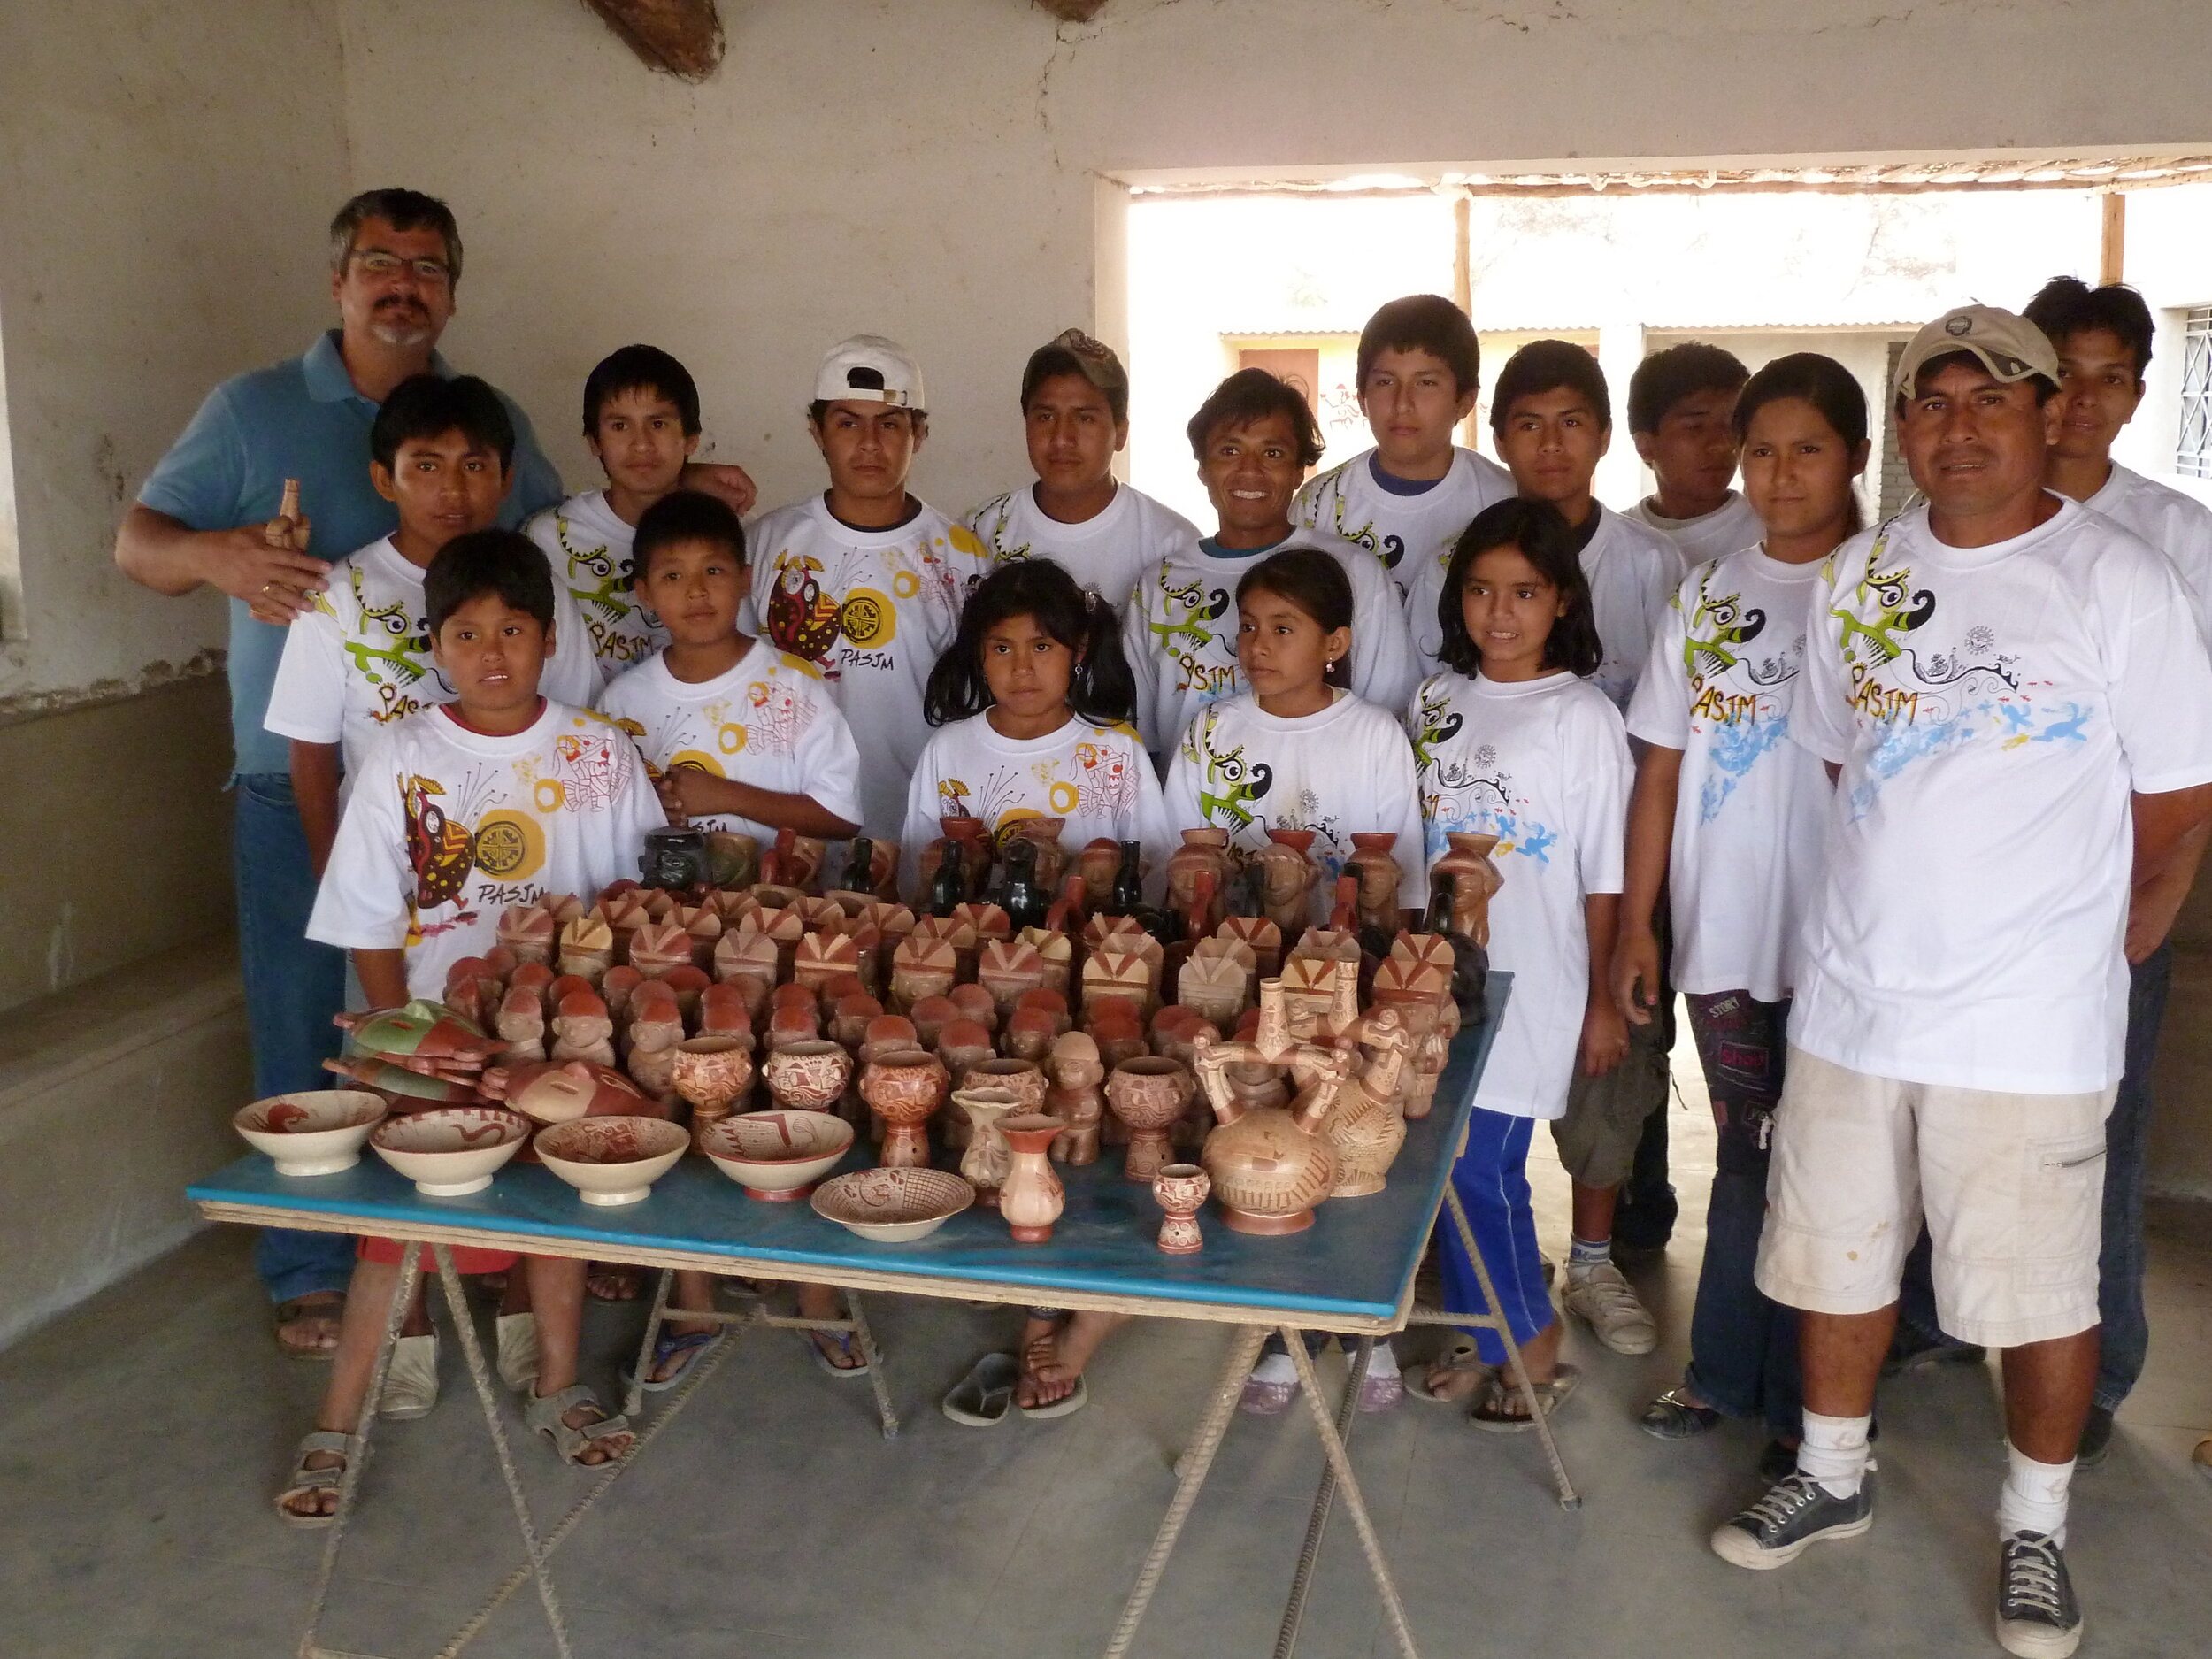  While the cultural heritage of San Jose de Moro is rich, the present local community is a poor one. And so, alongside excavations, Professor Castillo Butters and his team started a community development program. It struggled: “For years we were doin